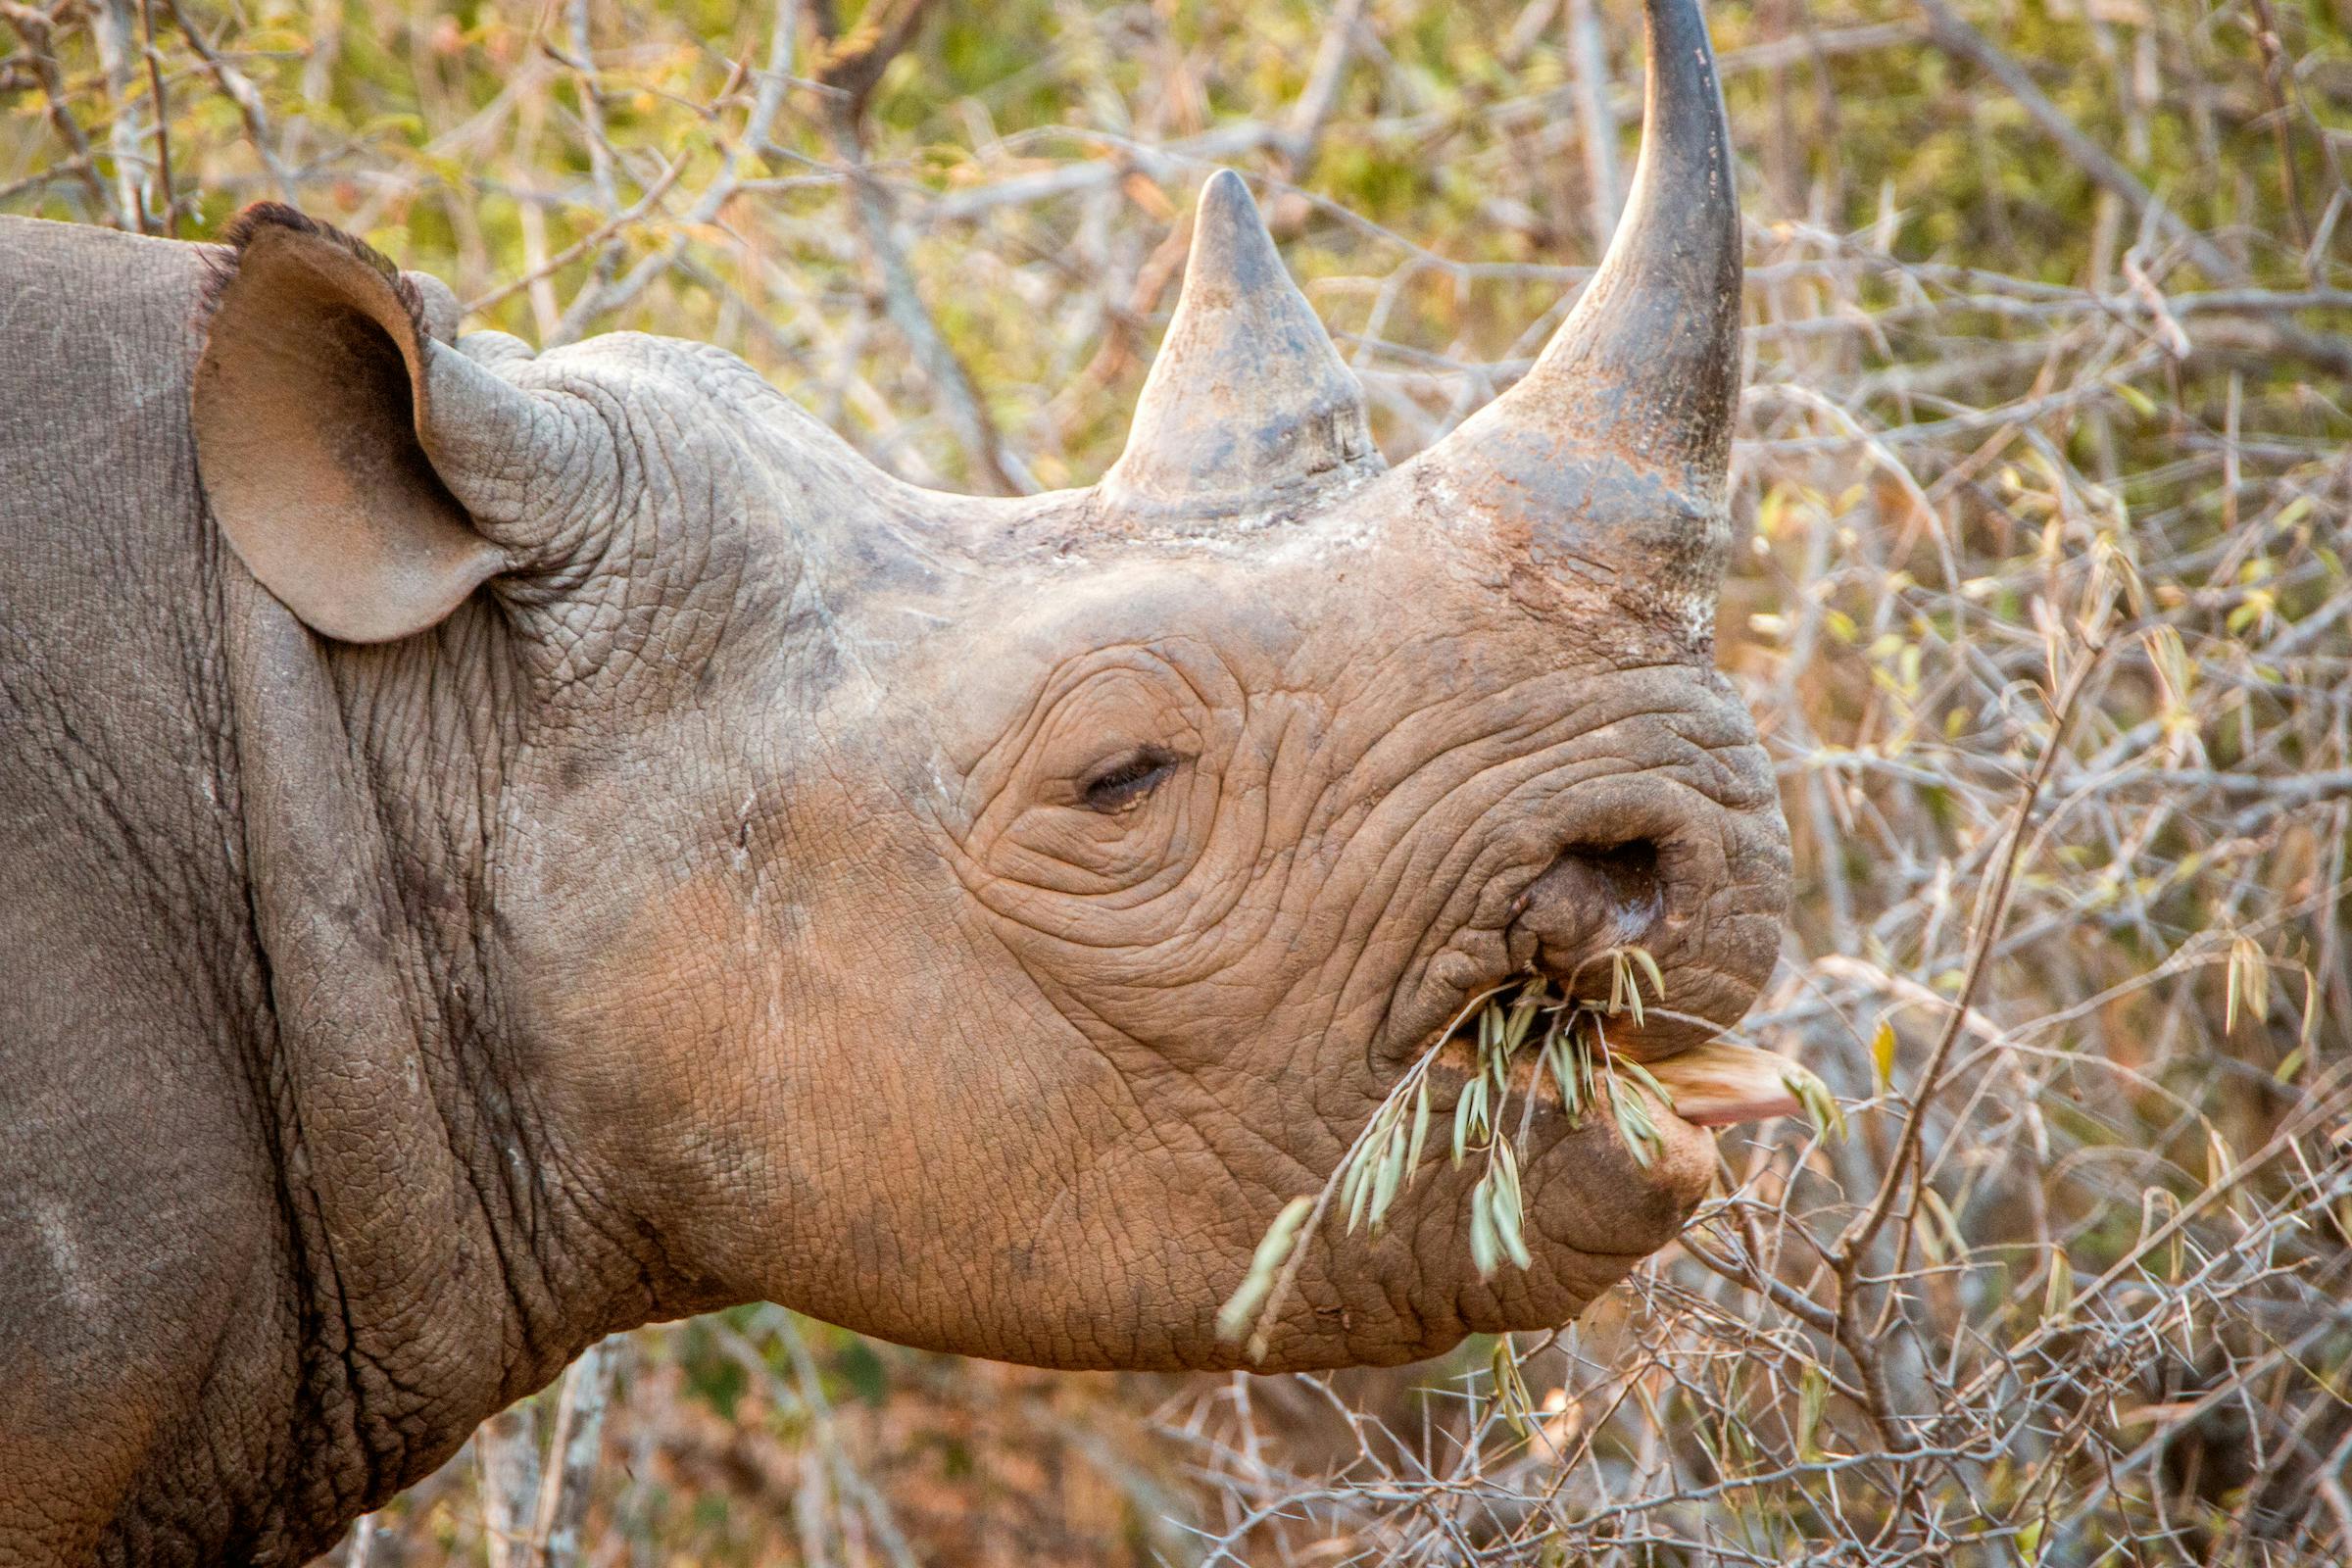 Framework of Interventions for effective Rhino protection Evaluation (Project FIRE)